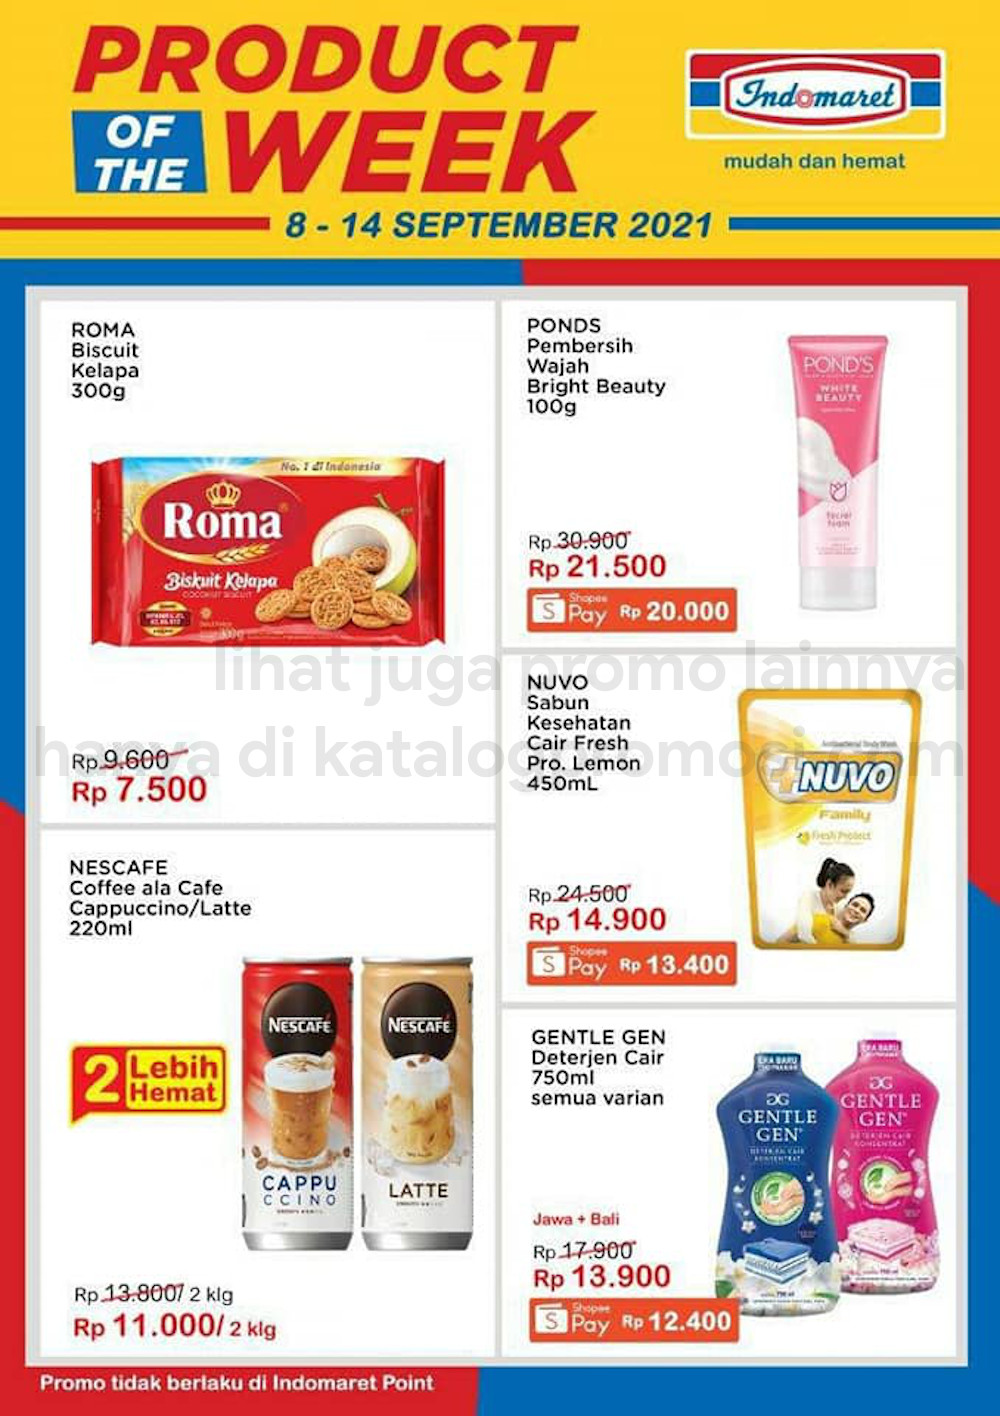 INDOMARET Promo PRODUCT of The Week periode 08-14 September 2021